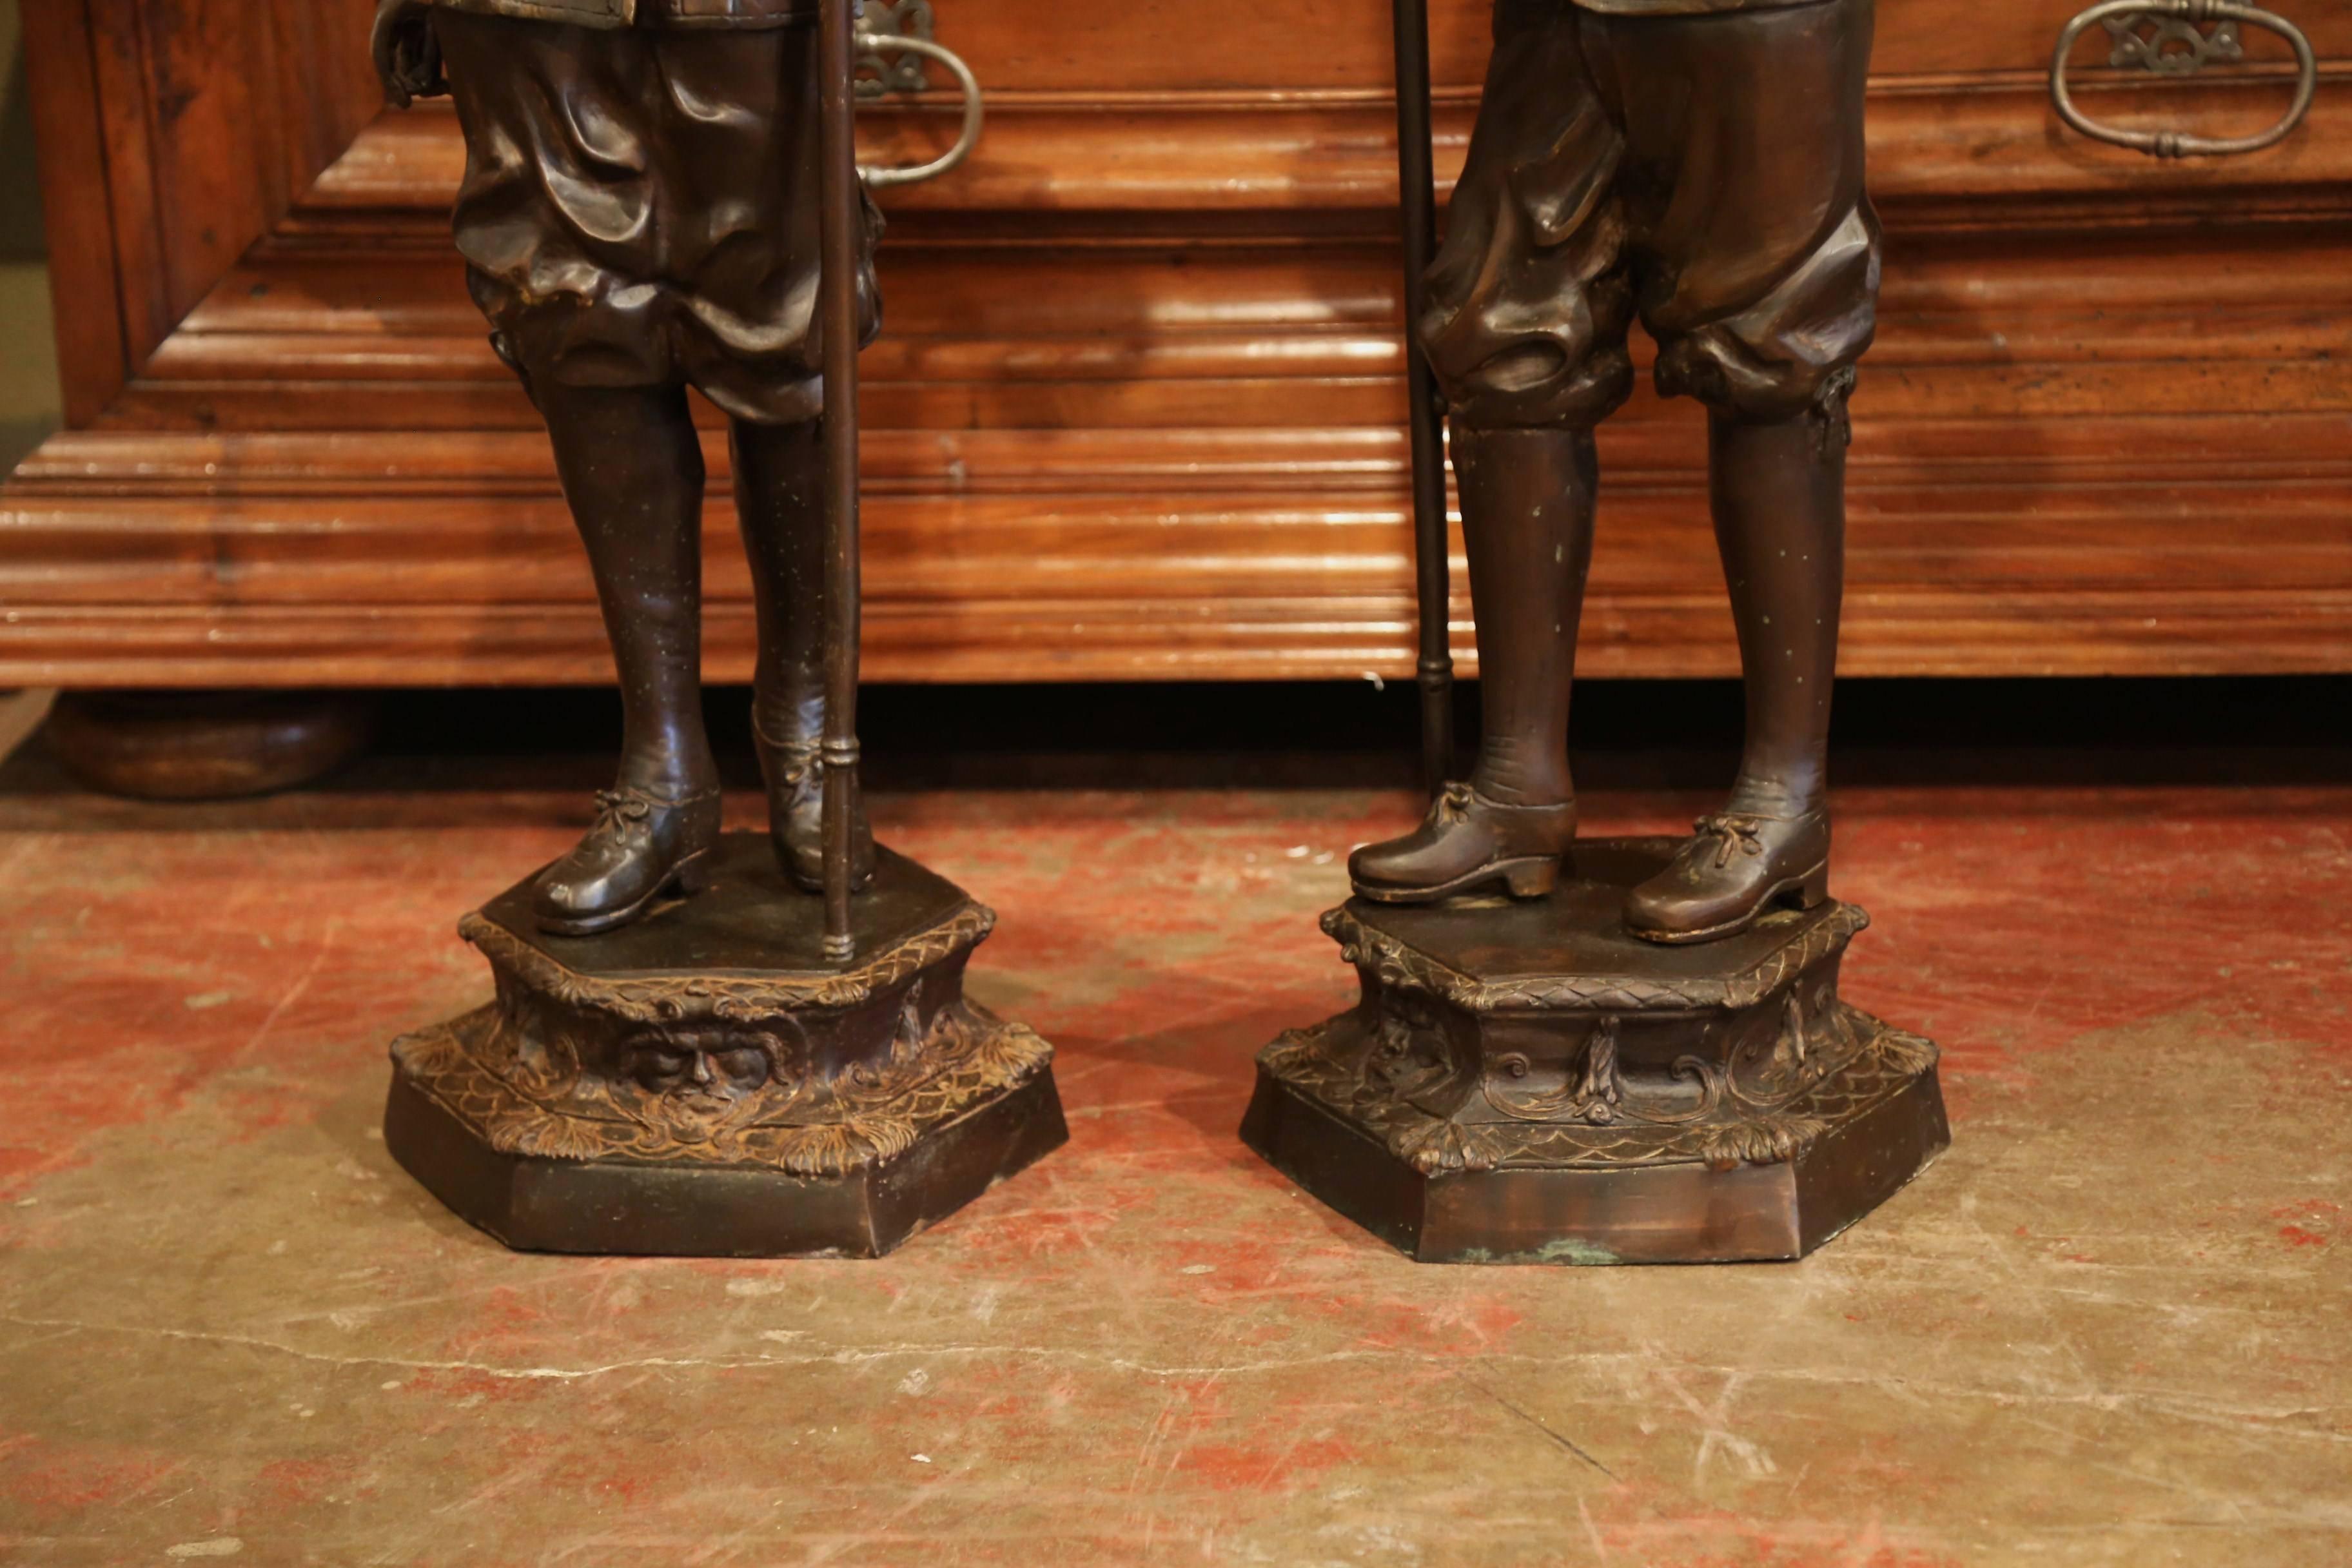 Hand-Crafted Pair of 19th Century French Patinated Musketeers Sculptures Signed E. Picault